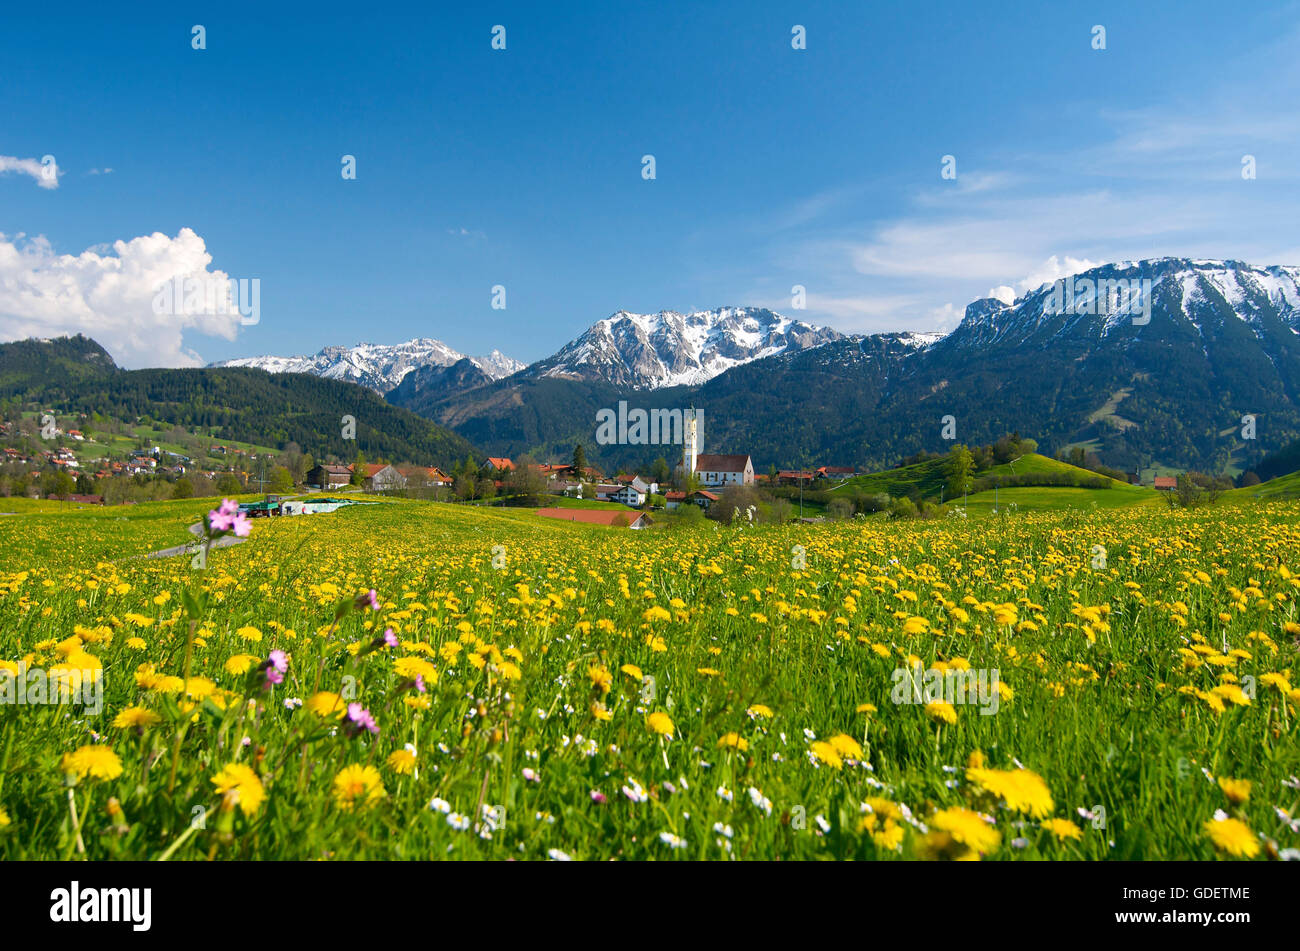 photography hi-res and Alamy Pfronten - germany images stock